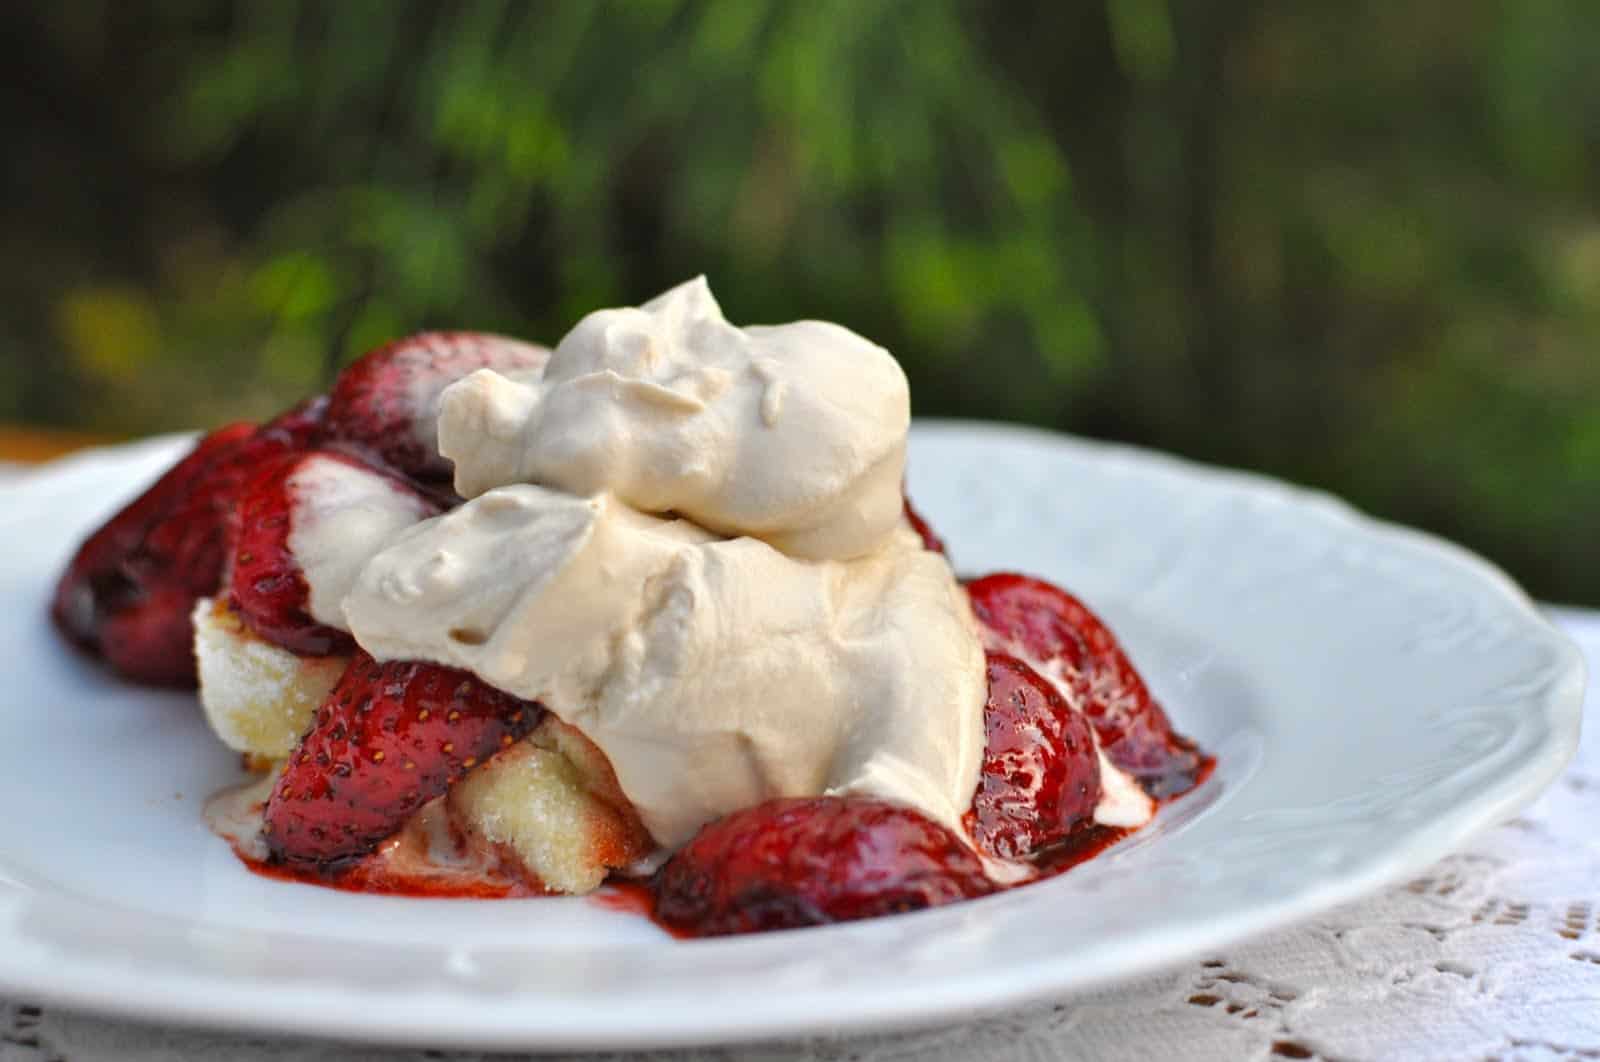 Pan Roasted Balsamic Strawberries topped with Whipped Cream